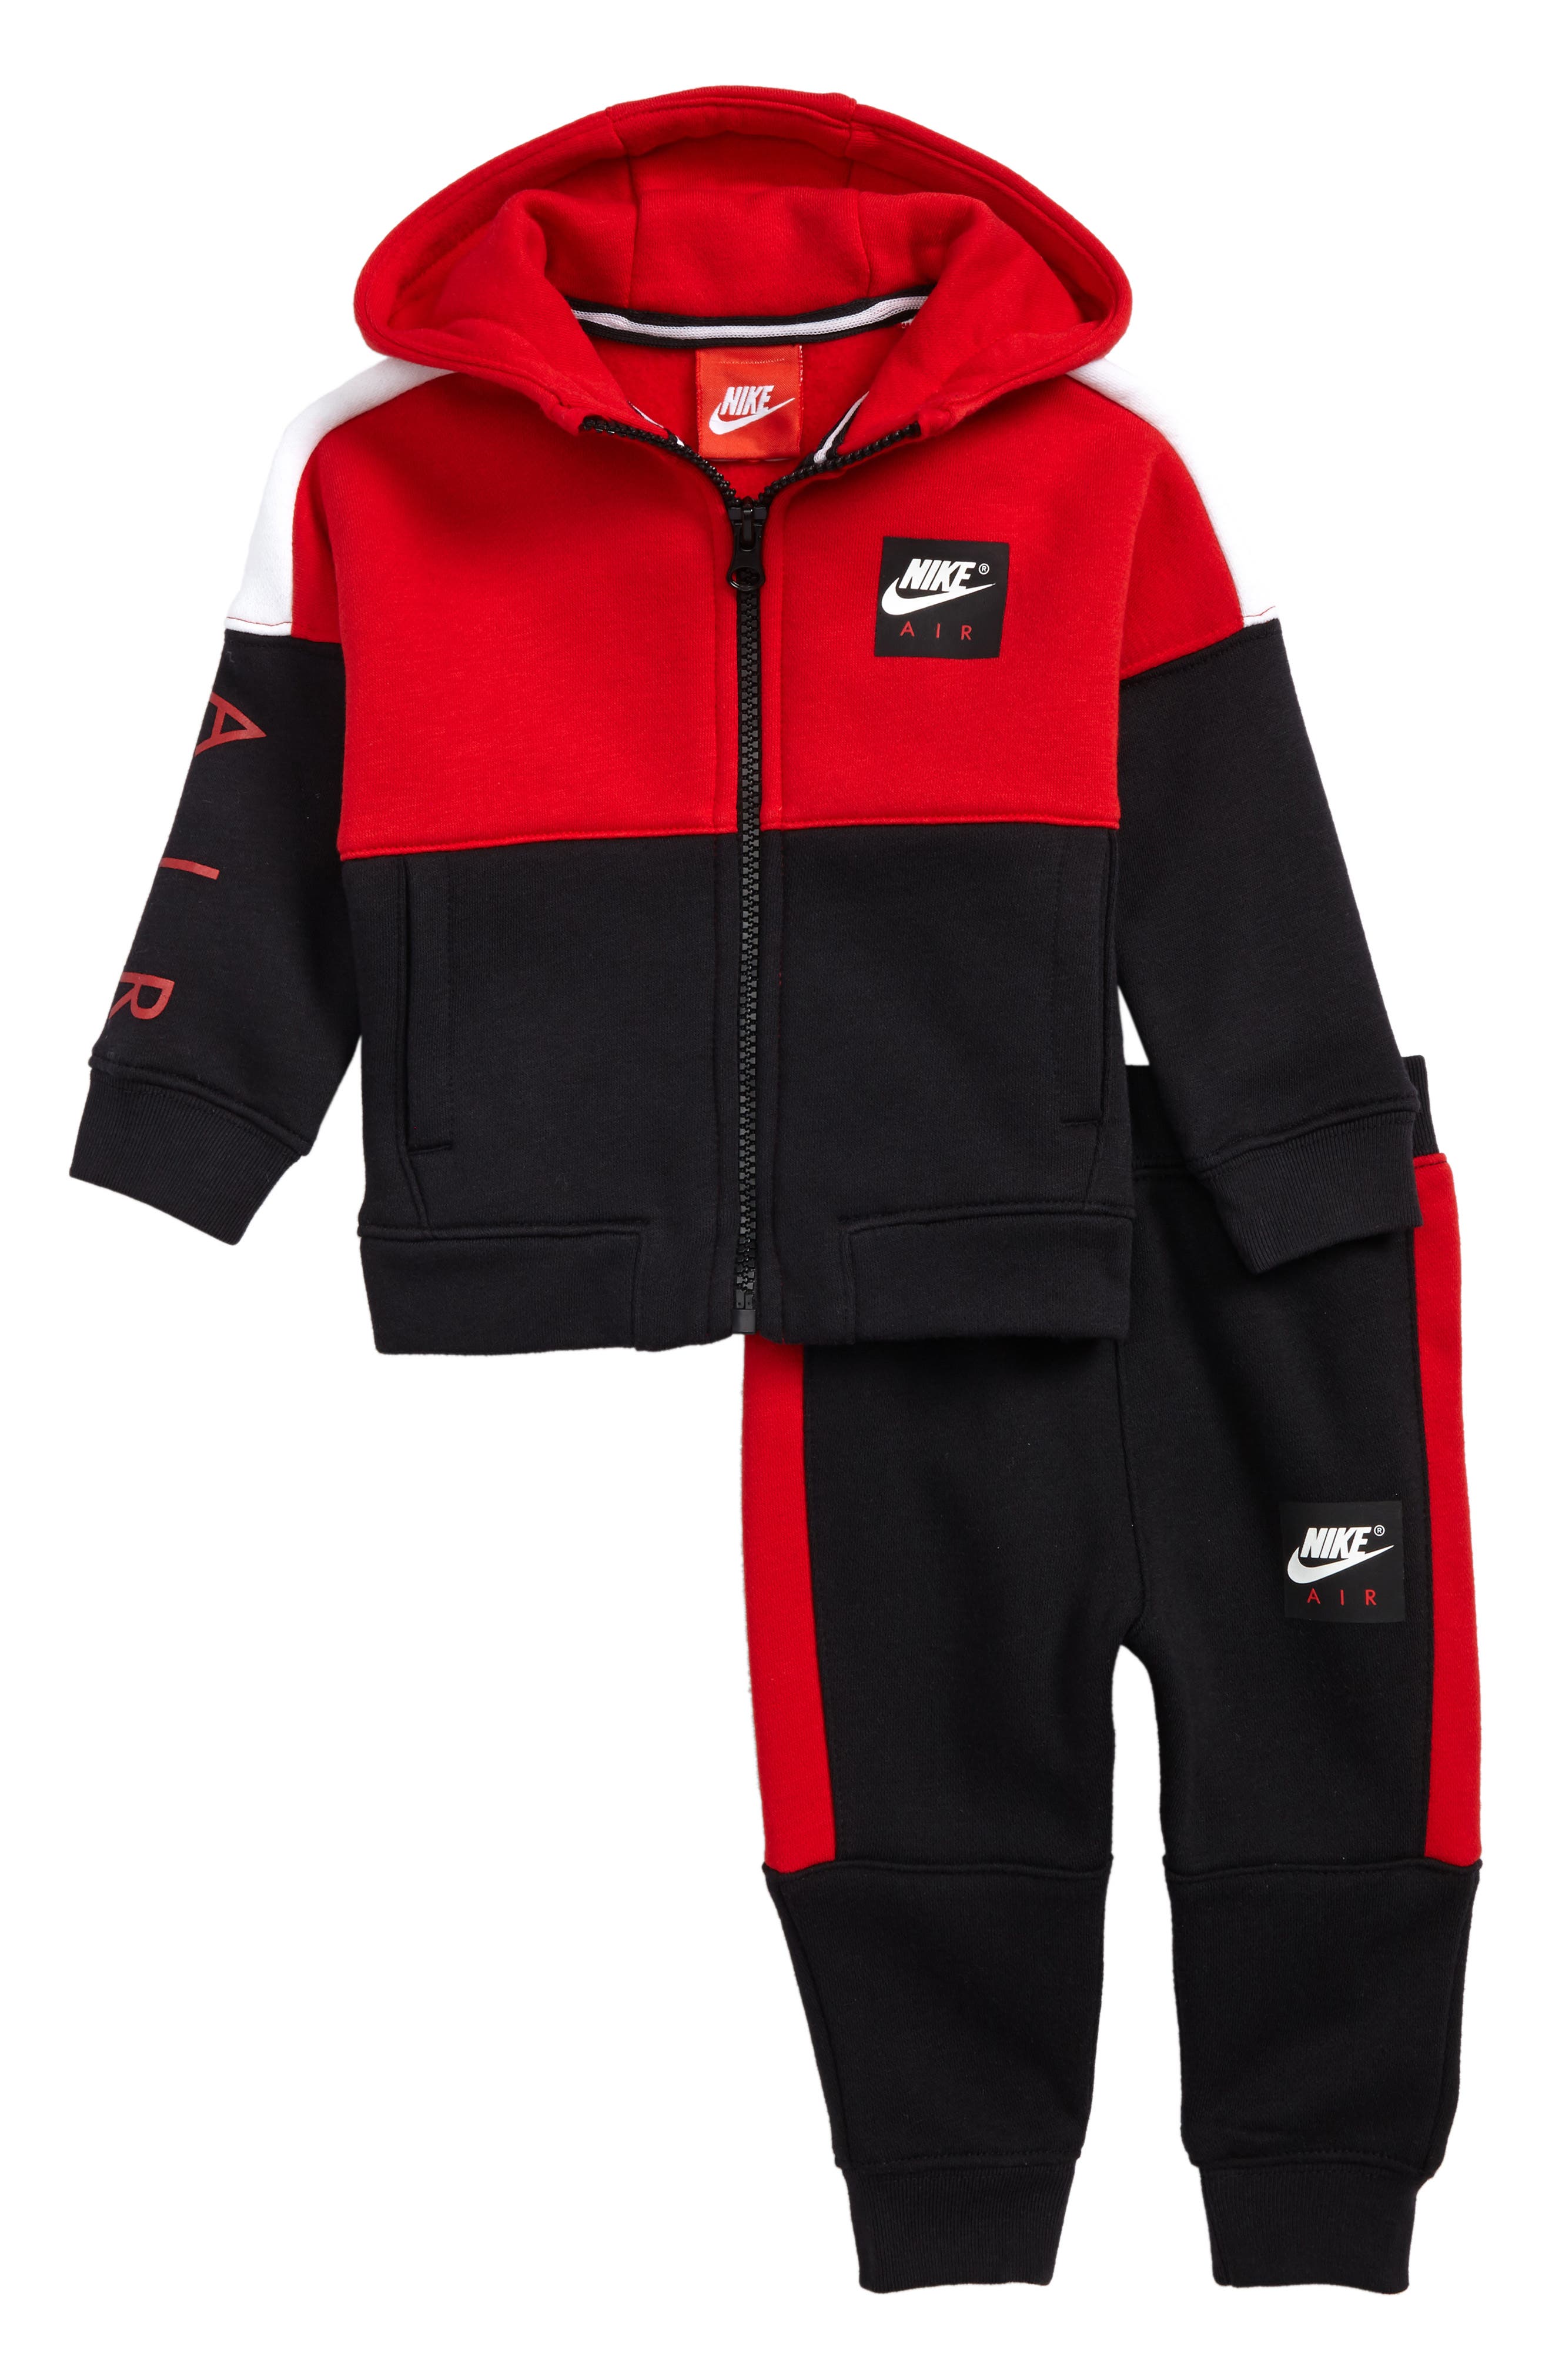 red and black nike suit